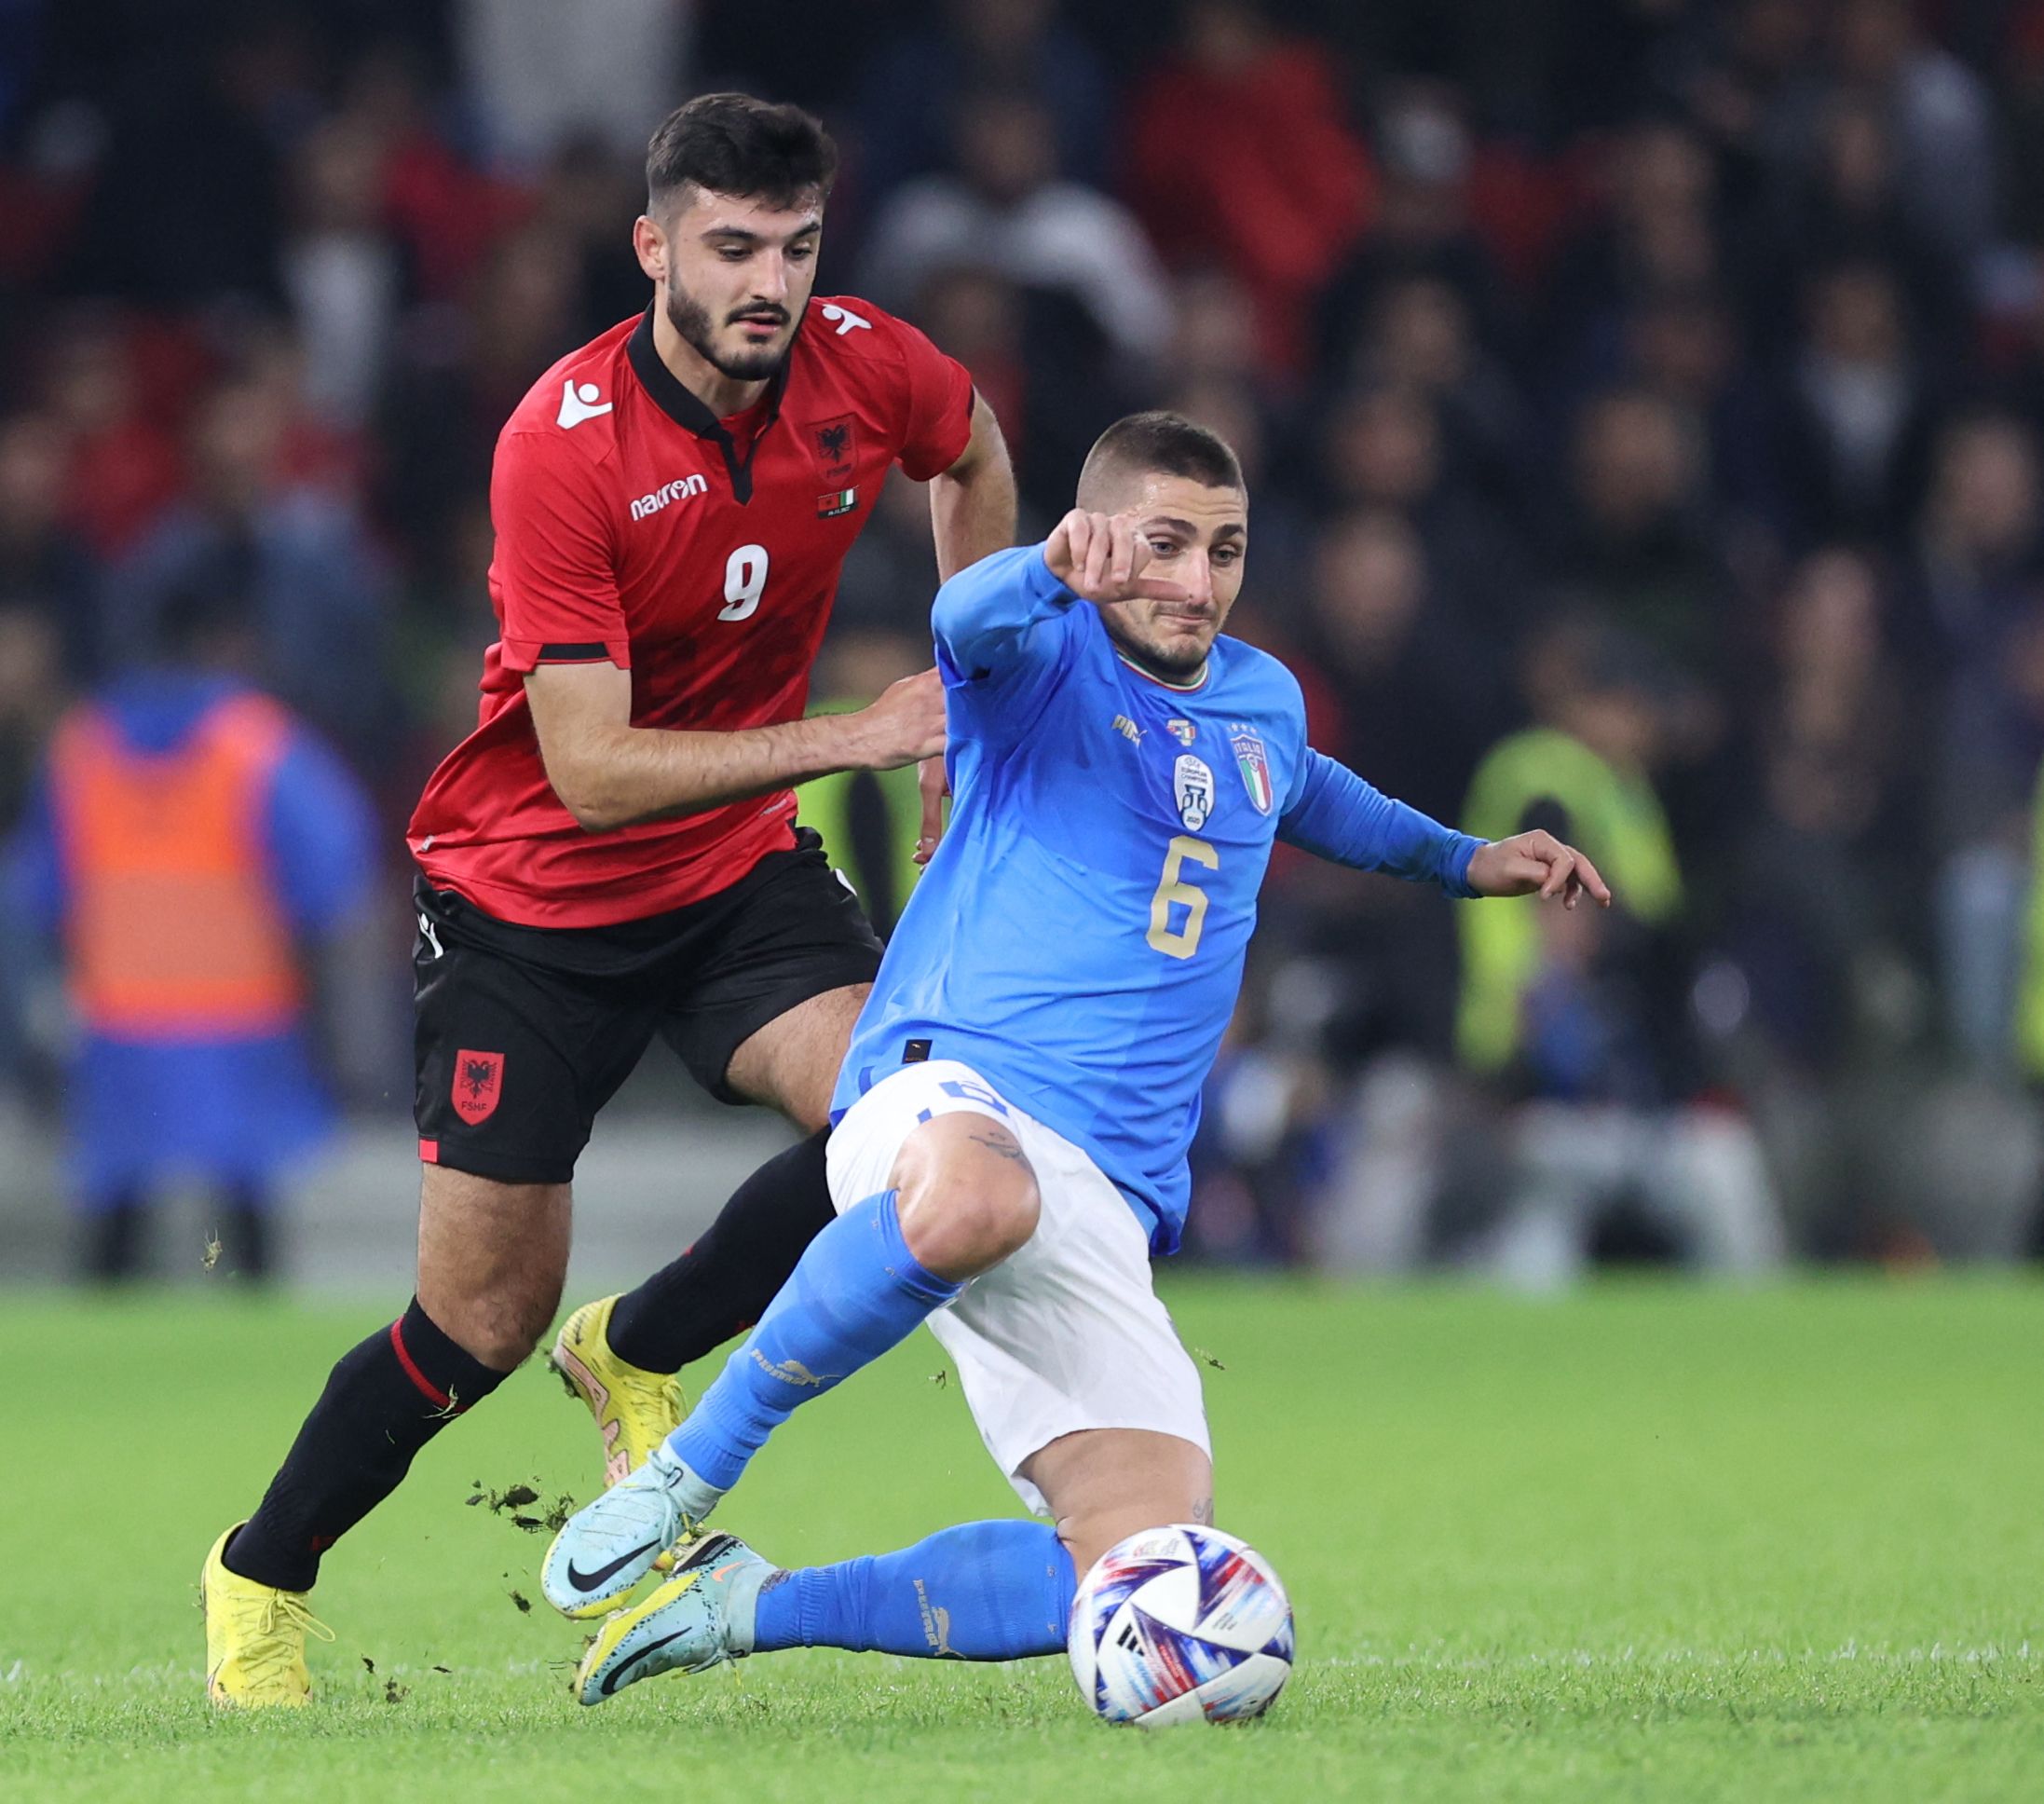 Albania's forward Armando Broja (L) fights for the ball with Italy's midfielder Marco Verratti (R) during a friendly football match between Albania and Italy, at the Air Albania Stadium in Tirana on November 16, 2022. (Photo by Gent SHKULLAKU / AFP)